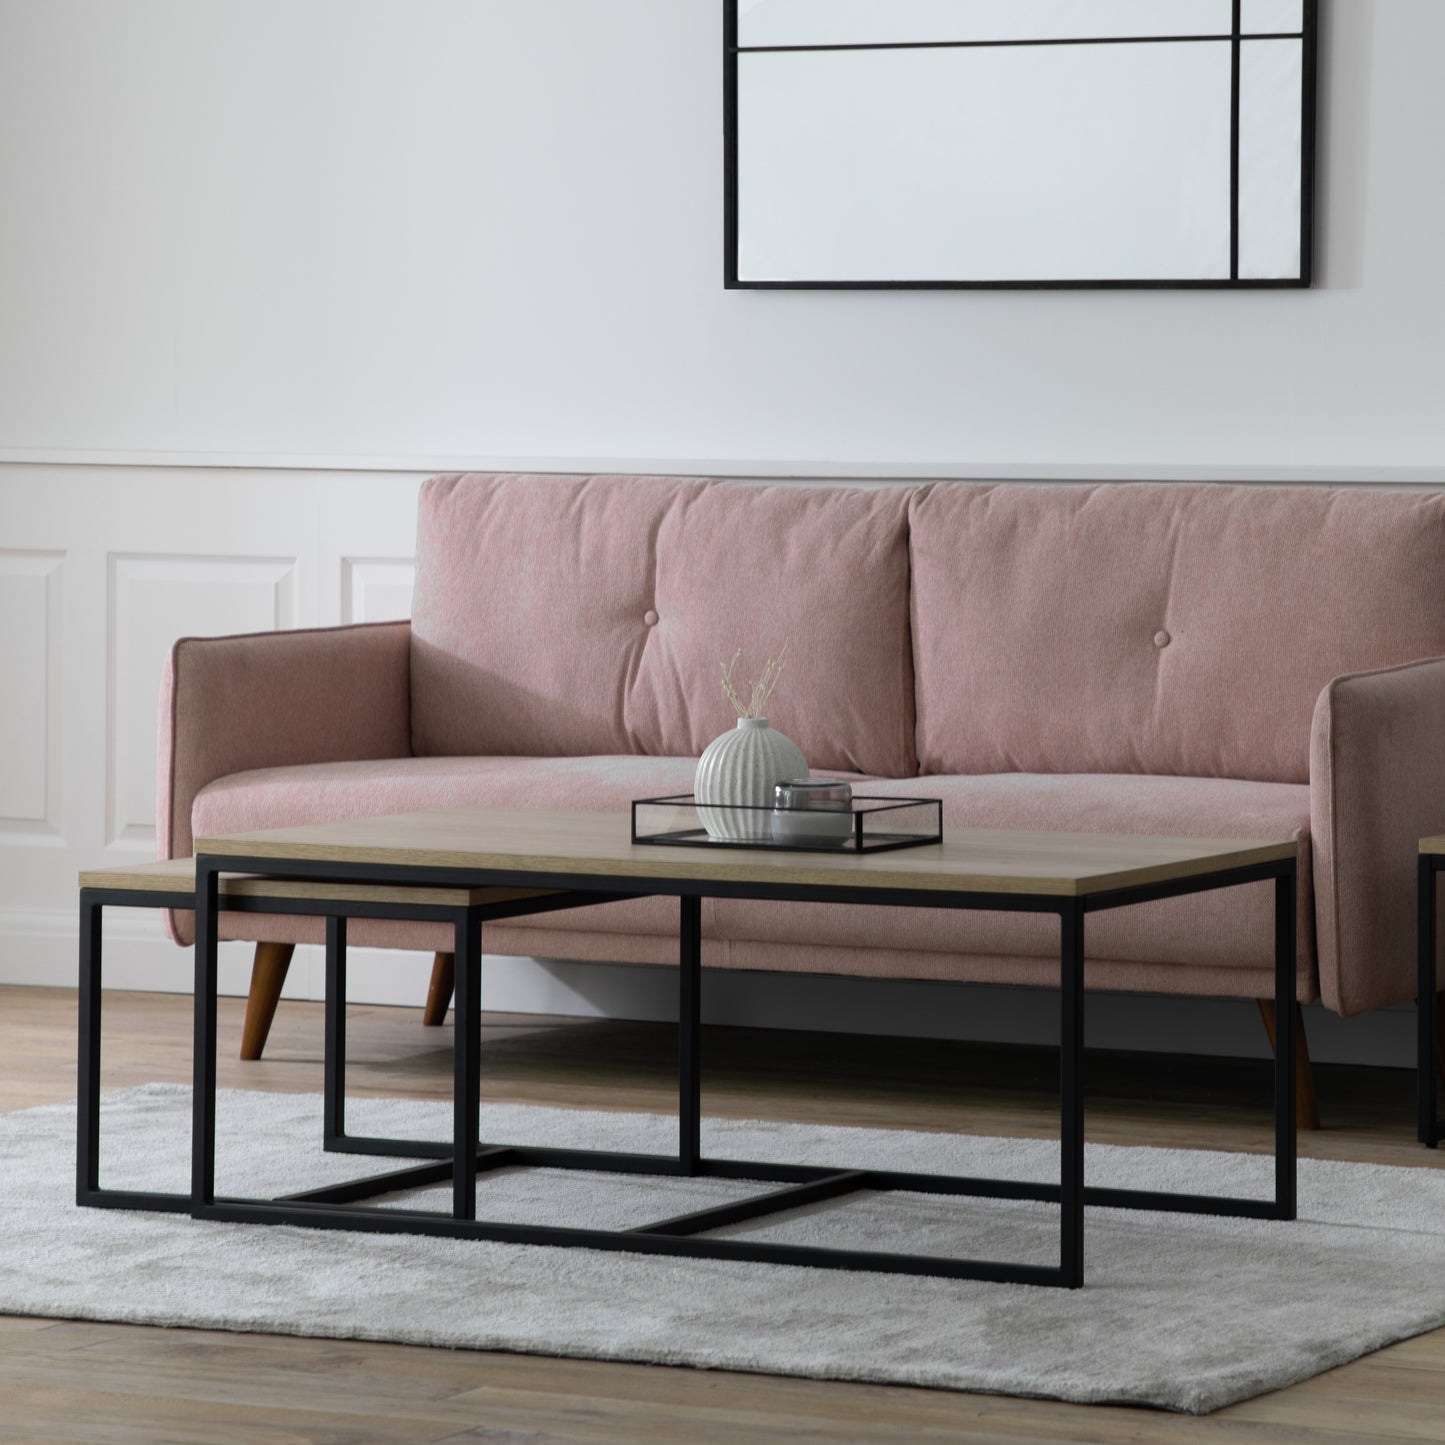 A living room with a pink couch and Staverton Coffee Table Nest from Kikiathome.co.uk, showcasing home furniture and interior decor.